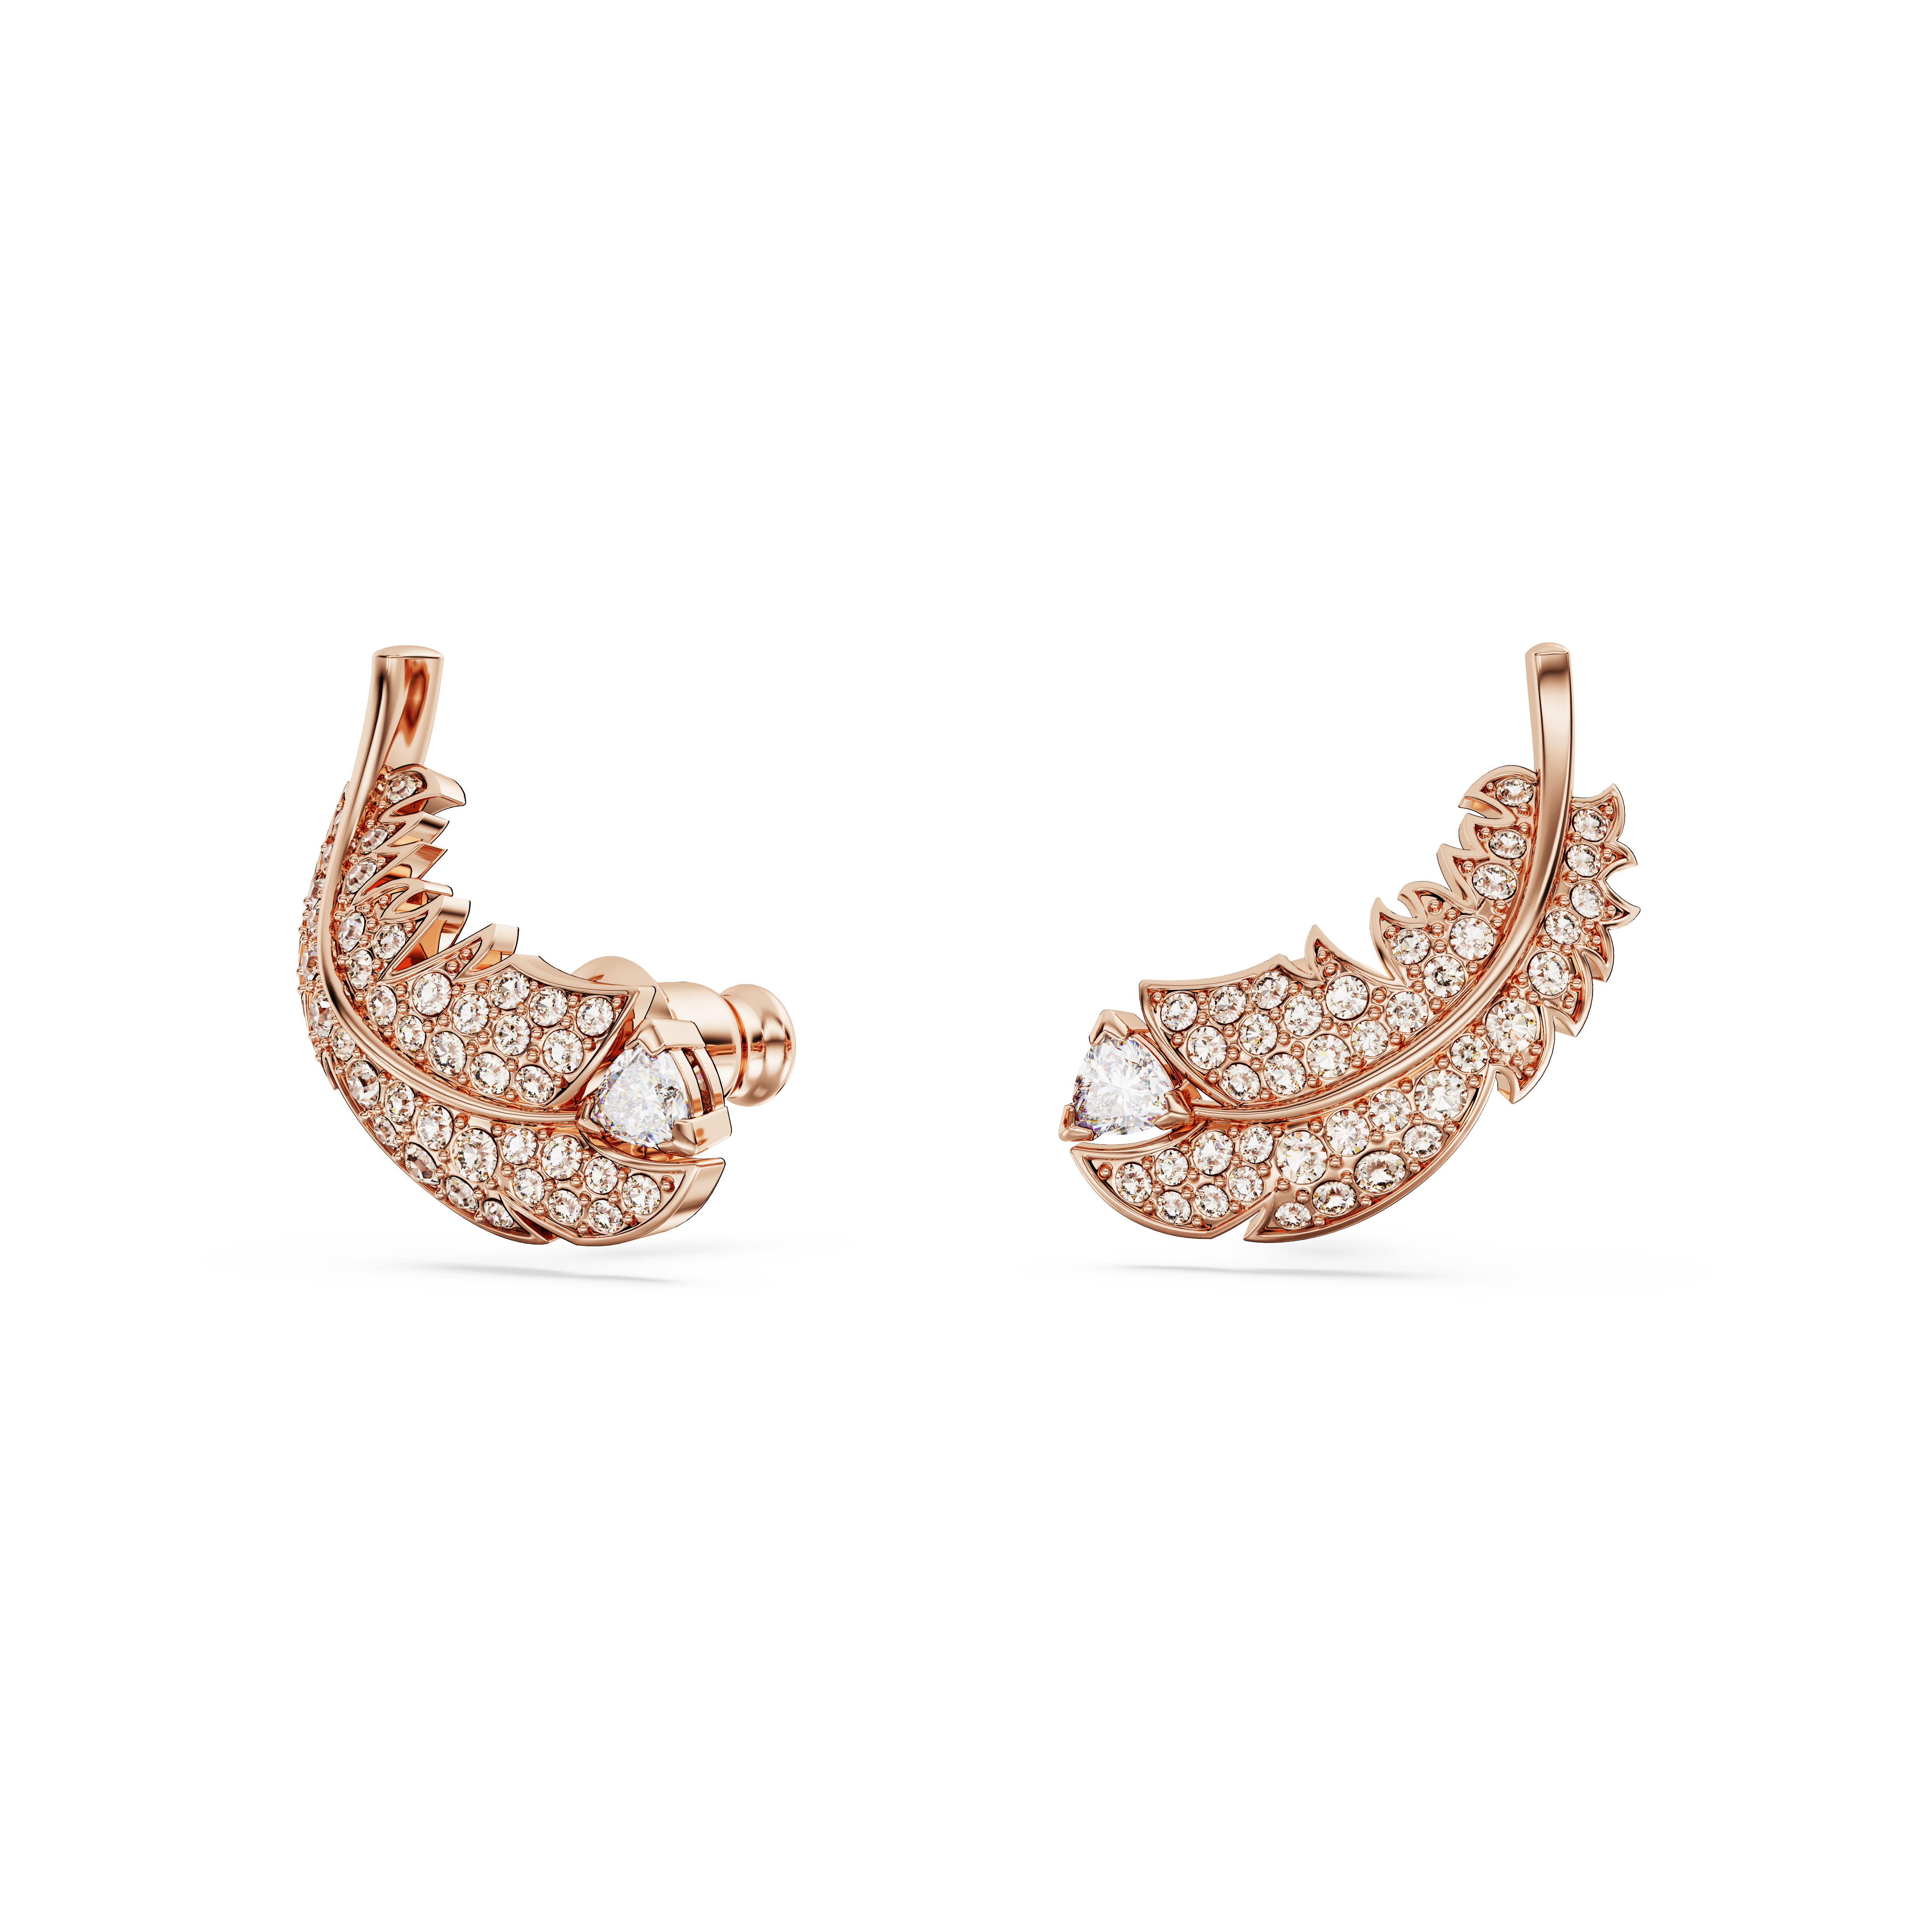 SWAROVSKI NICE STUD EARRINGS, FEATHER, WHITE, ROSE GOLD-TONE PLATED 5663490